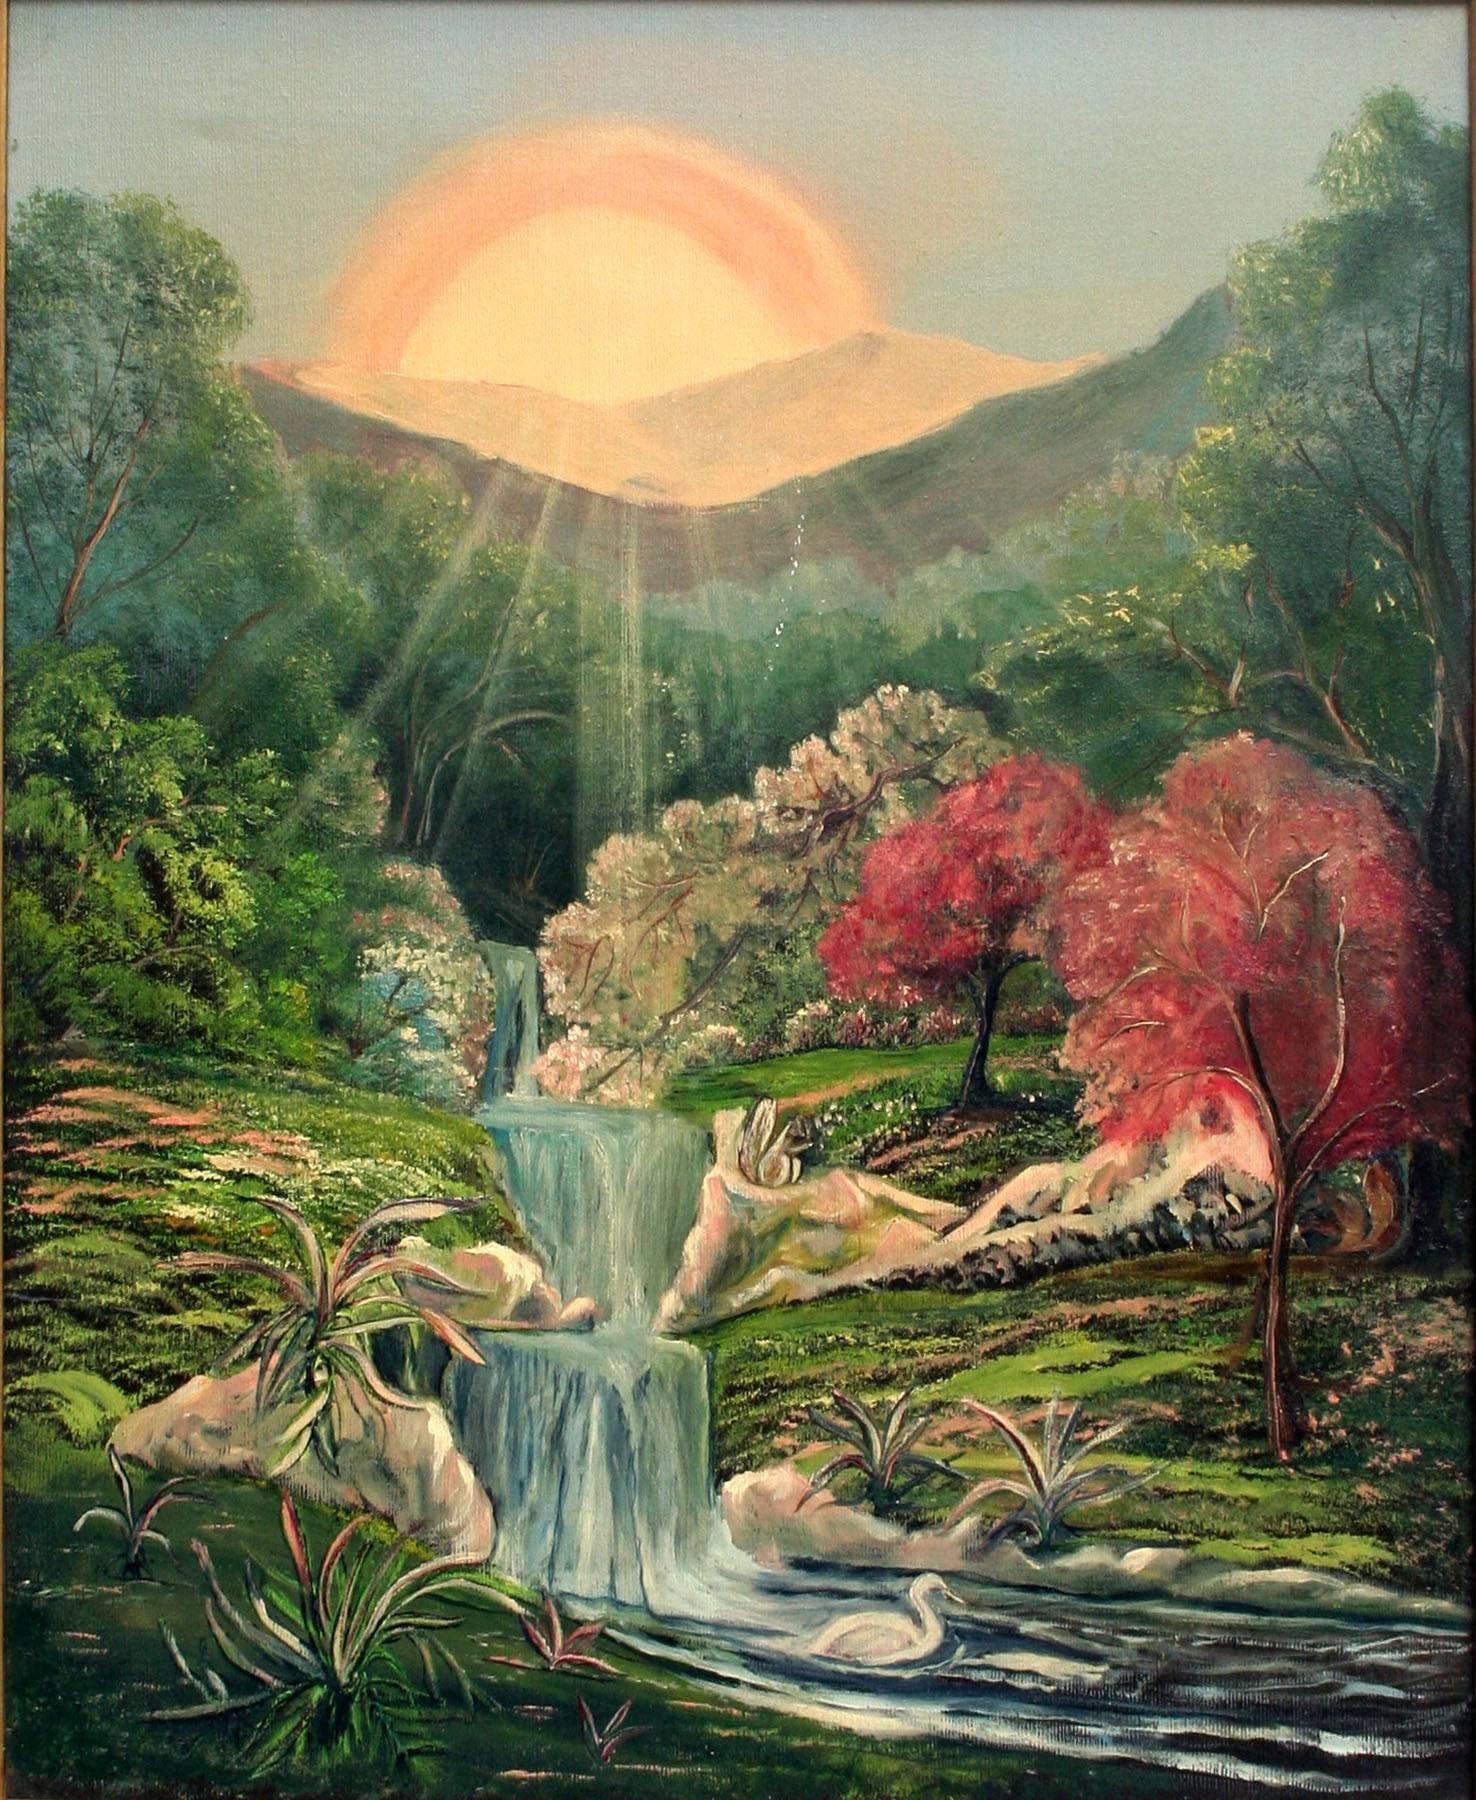 Mystical Sunrise and Waterfall, Visionary  - Painting by Joseph Parker